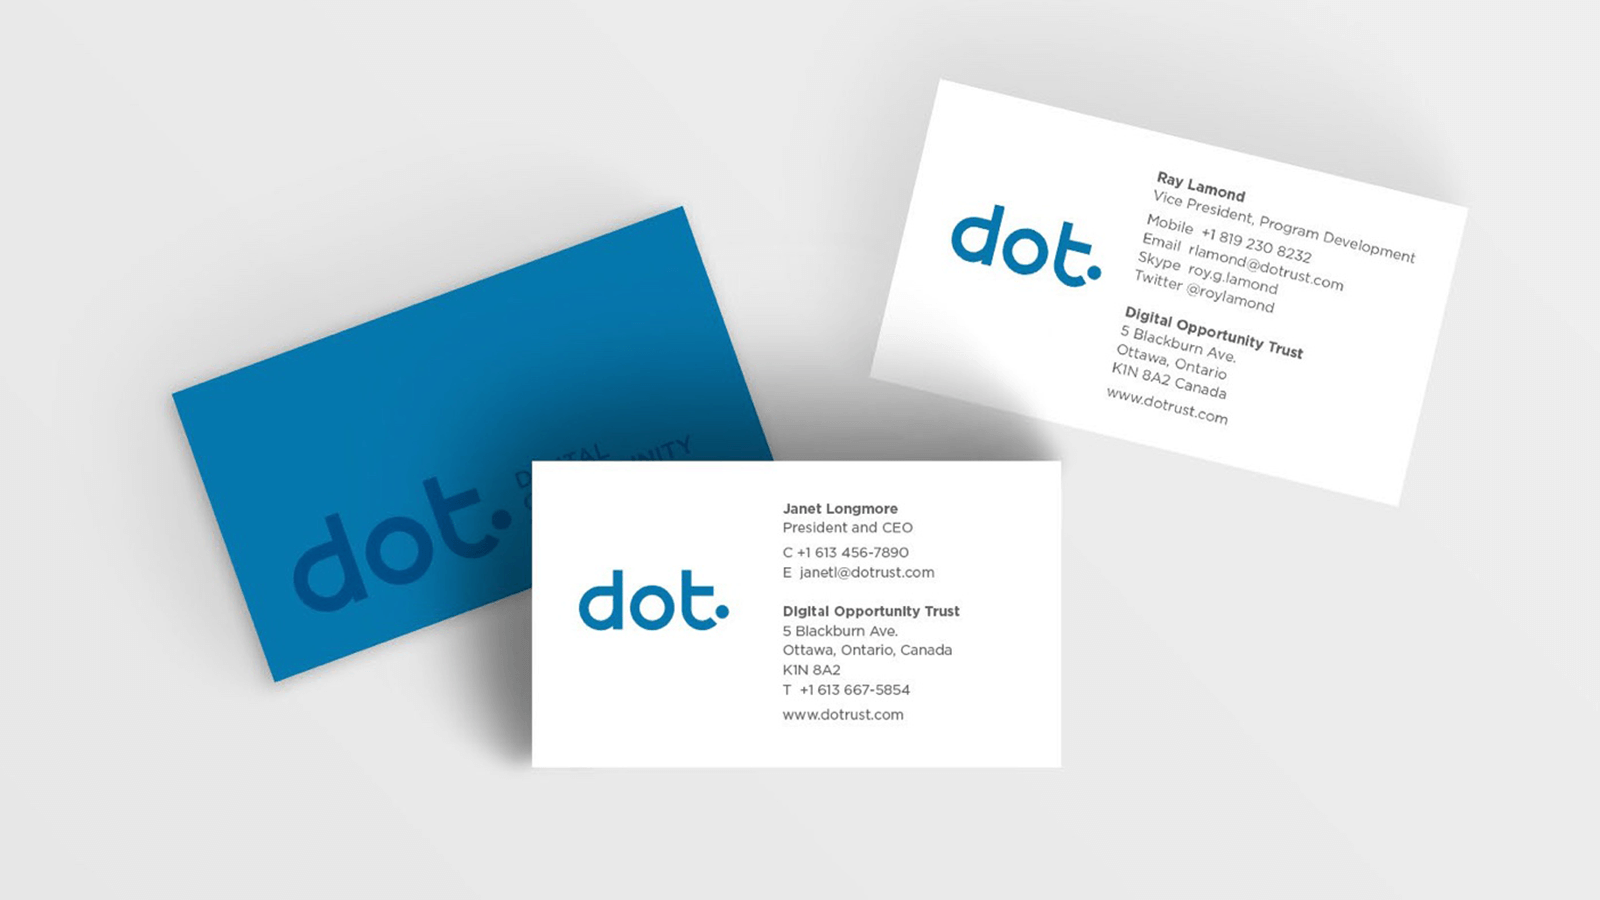 Digital Opportunity Trust business cards